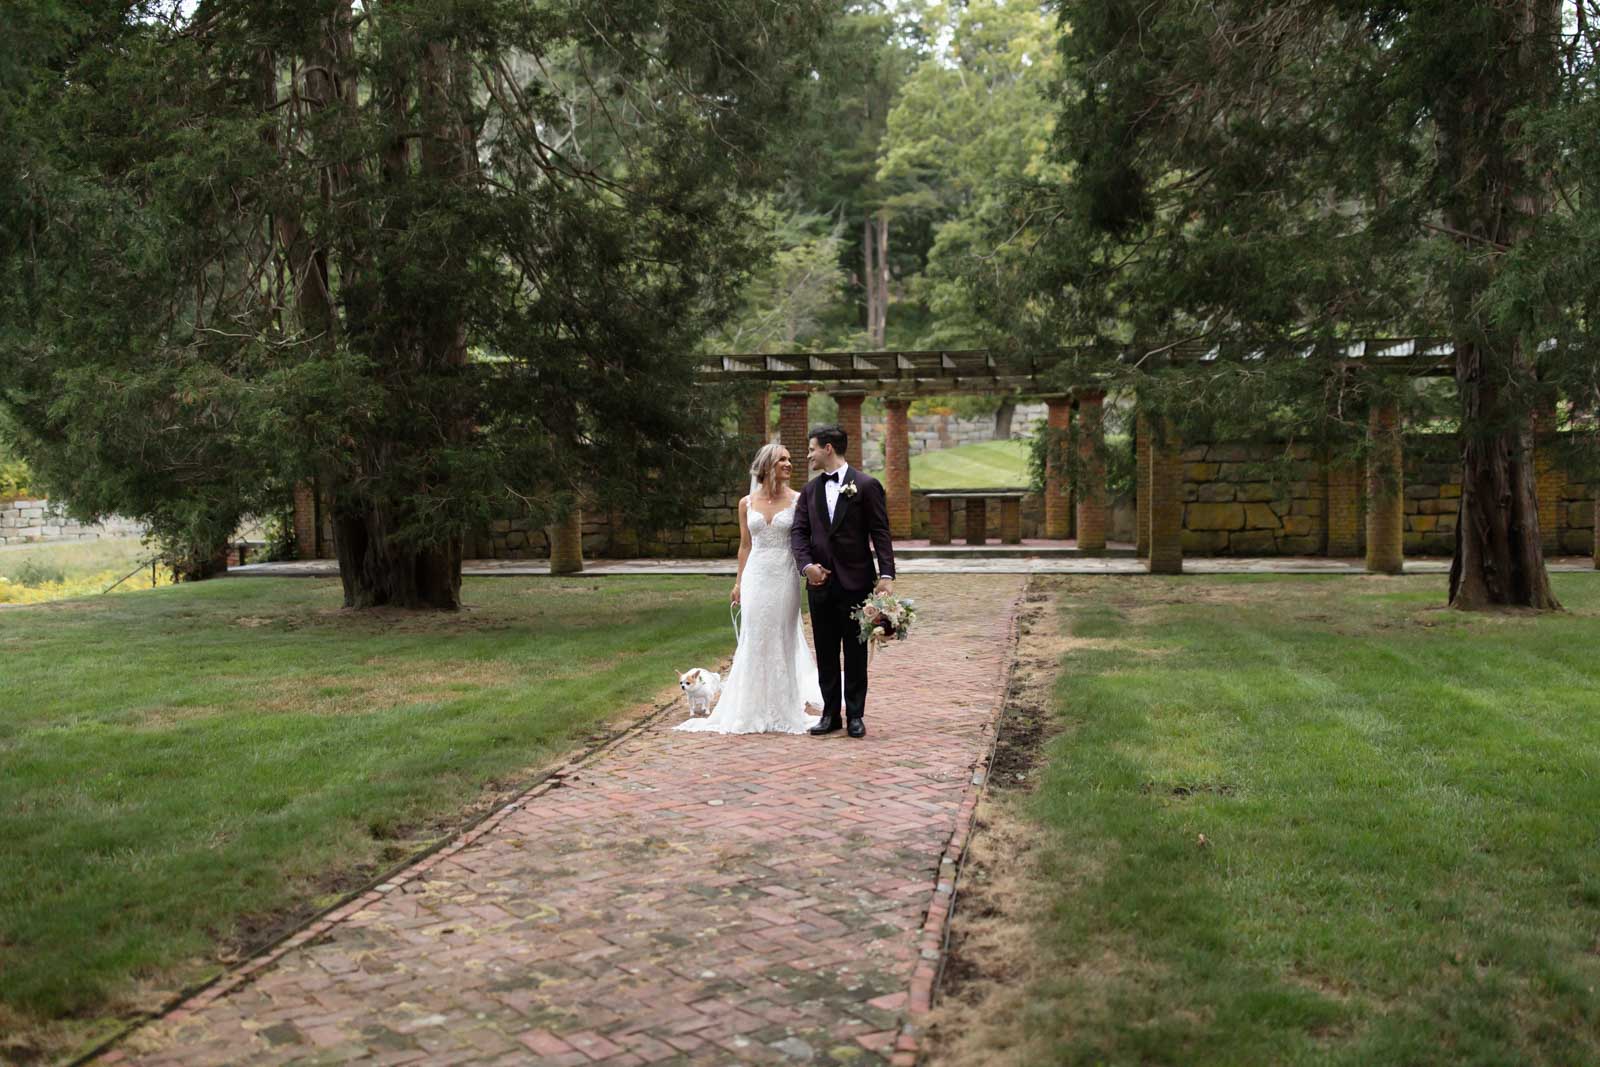 Bride and Groom after their wedding at the Mansion on Turner Hill in Ipswich, MA